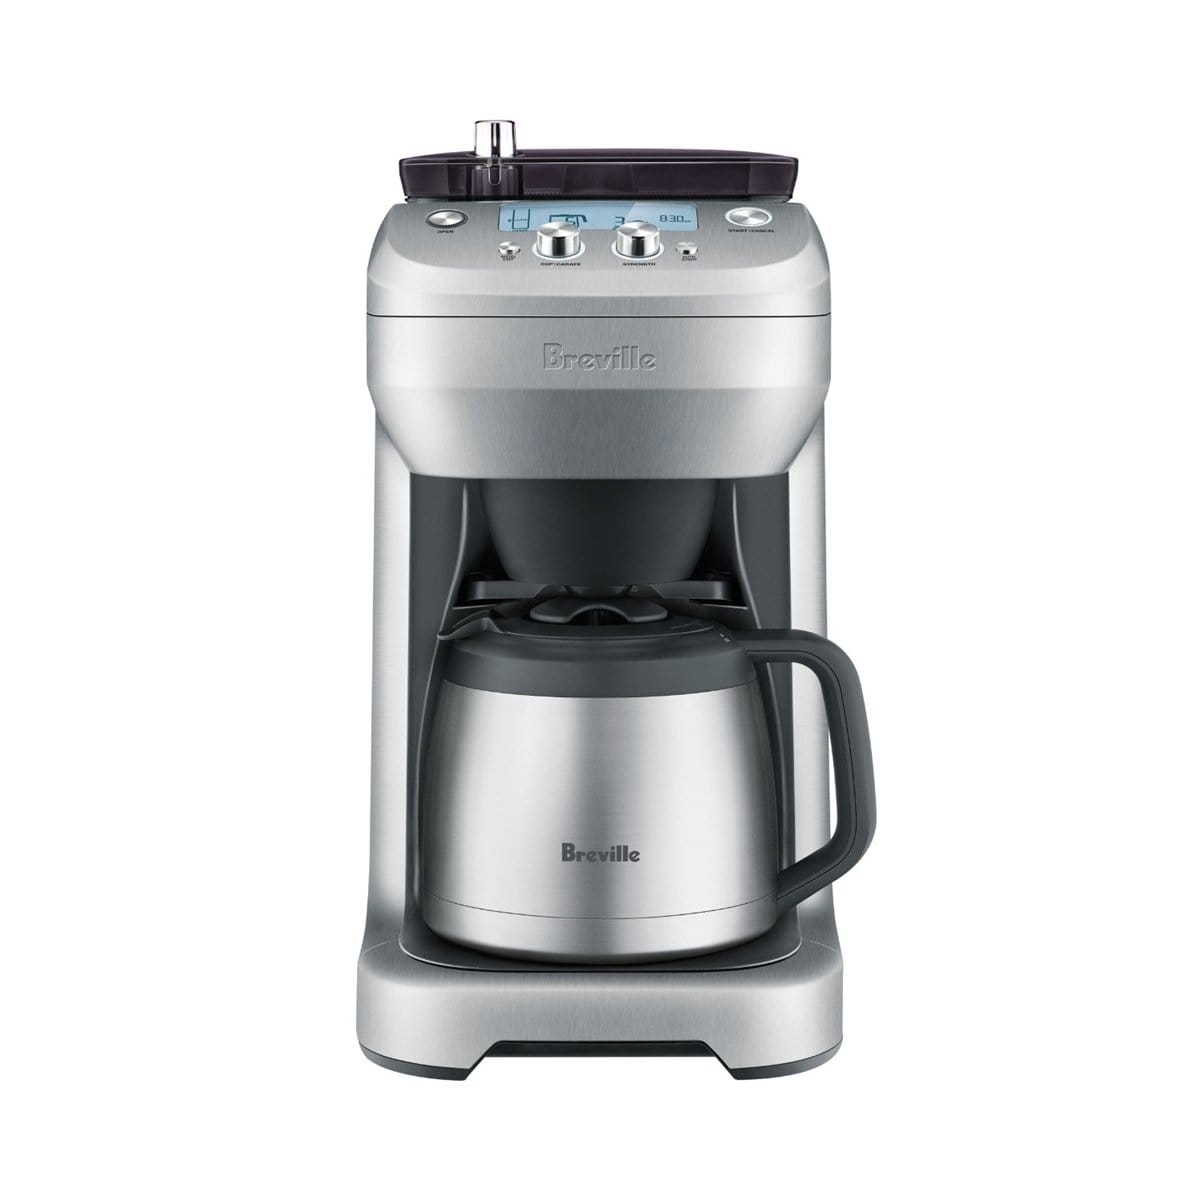 https://cdn.shopify.com/s/files/1/0473/5398/7229/products/breville-breville-grind-control-coffeemaker-silver-021614054982-19592096514208_2000x.jpg?v=1626103567